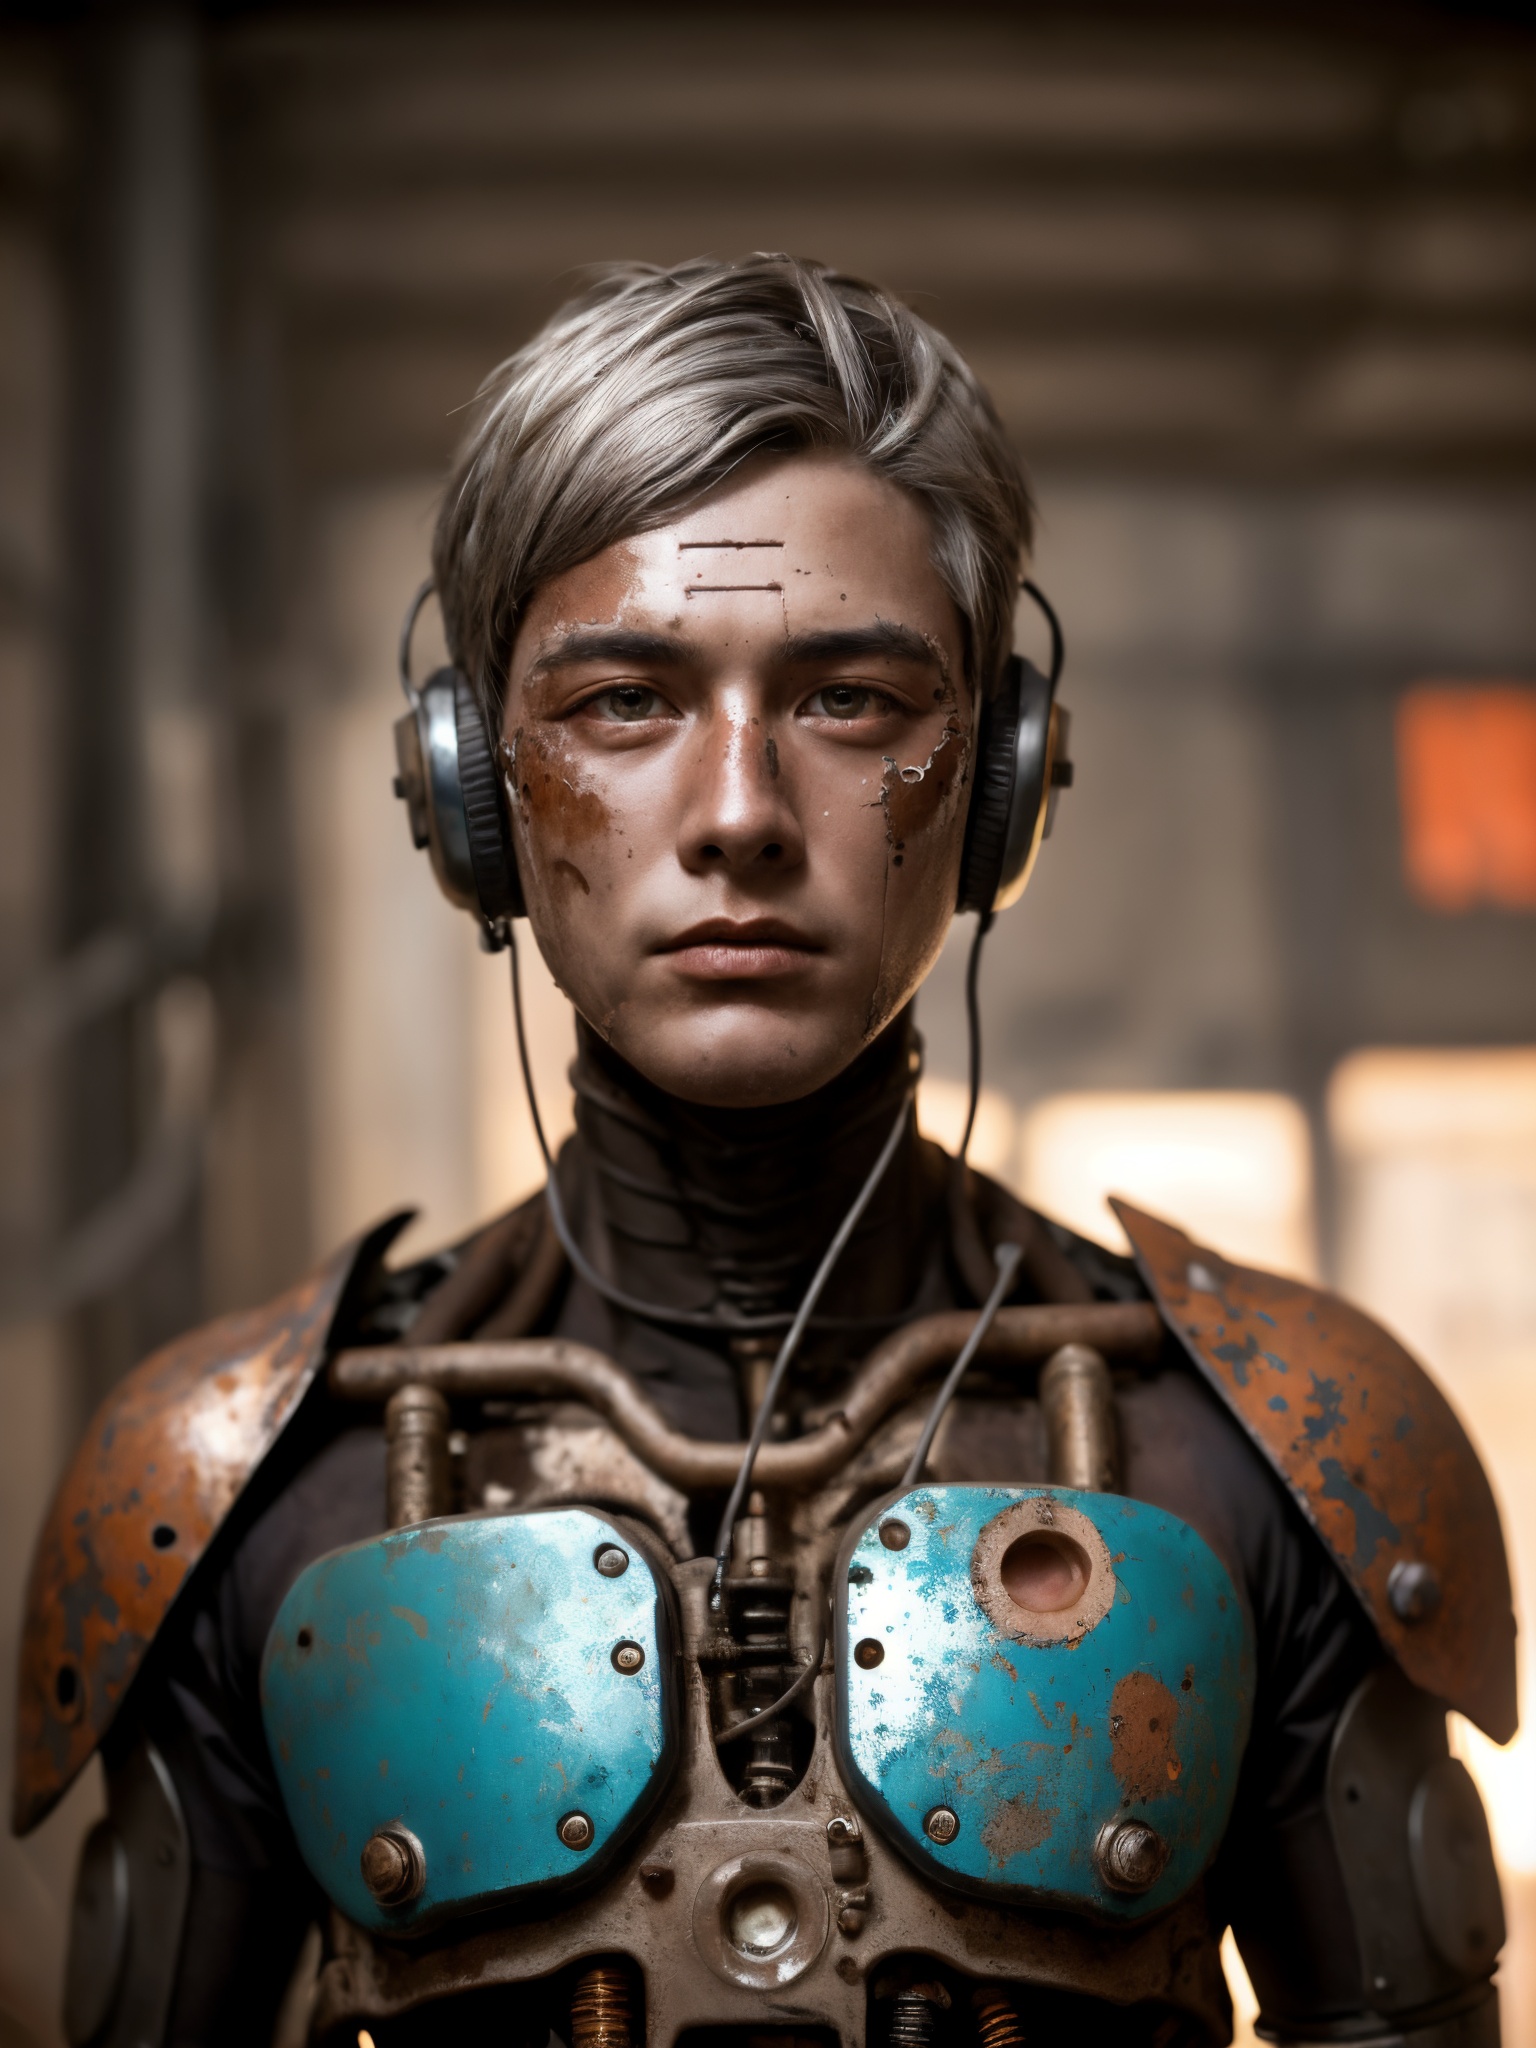 close-up portrait of an aged male android, his face a mosaic of weathered, rusted metal plates and exposed circuitry. Silver hair, streaked with the patina of time, partially covers his ancient mechanical cranium. His eyes, one human-like and the other a glowing amber optic, stare intensely into the camera, conveying a lifetime of synthetic memories. The remnants of paint and old battles mar his metallic skin, suggesting a history of service and survival. His neck and shoulders, visible parts of an intricate network of corroded metal and frayed wires, blend into his torso, hinting at a complex structure beneath. The background is dark and subdued, focusing attention on the fine details of his face, the texture of rust, the subtle hints of blue and red corrosion, and the delicate balance between human semblance and mechanical originunderbelly